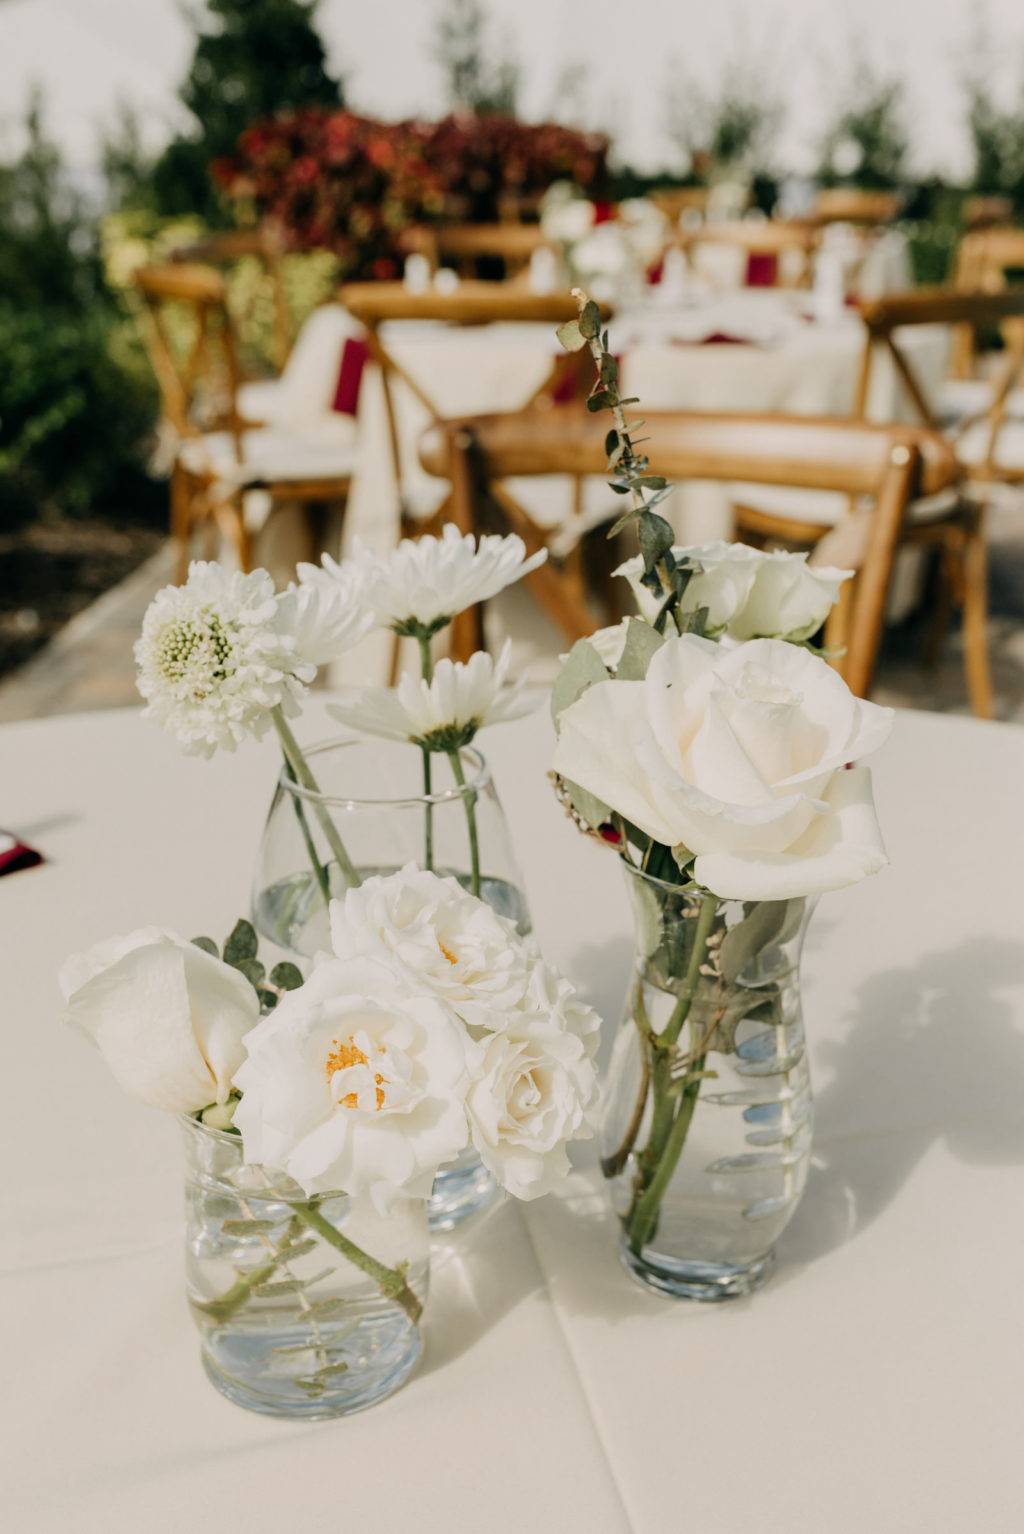 Garden Inspired Wedding Reception Decor, Low Simple White Roses and Single Stem Flowers in Mason Jars Centerpiece | Tampa Bay Wedding Photographer Amber McWhorter Photography | Wedding Florist Brides & Blooms